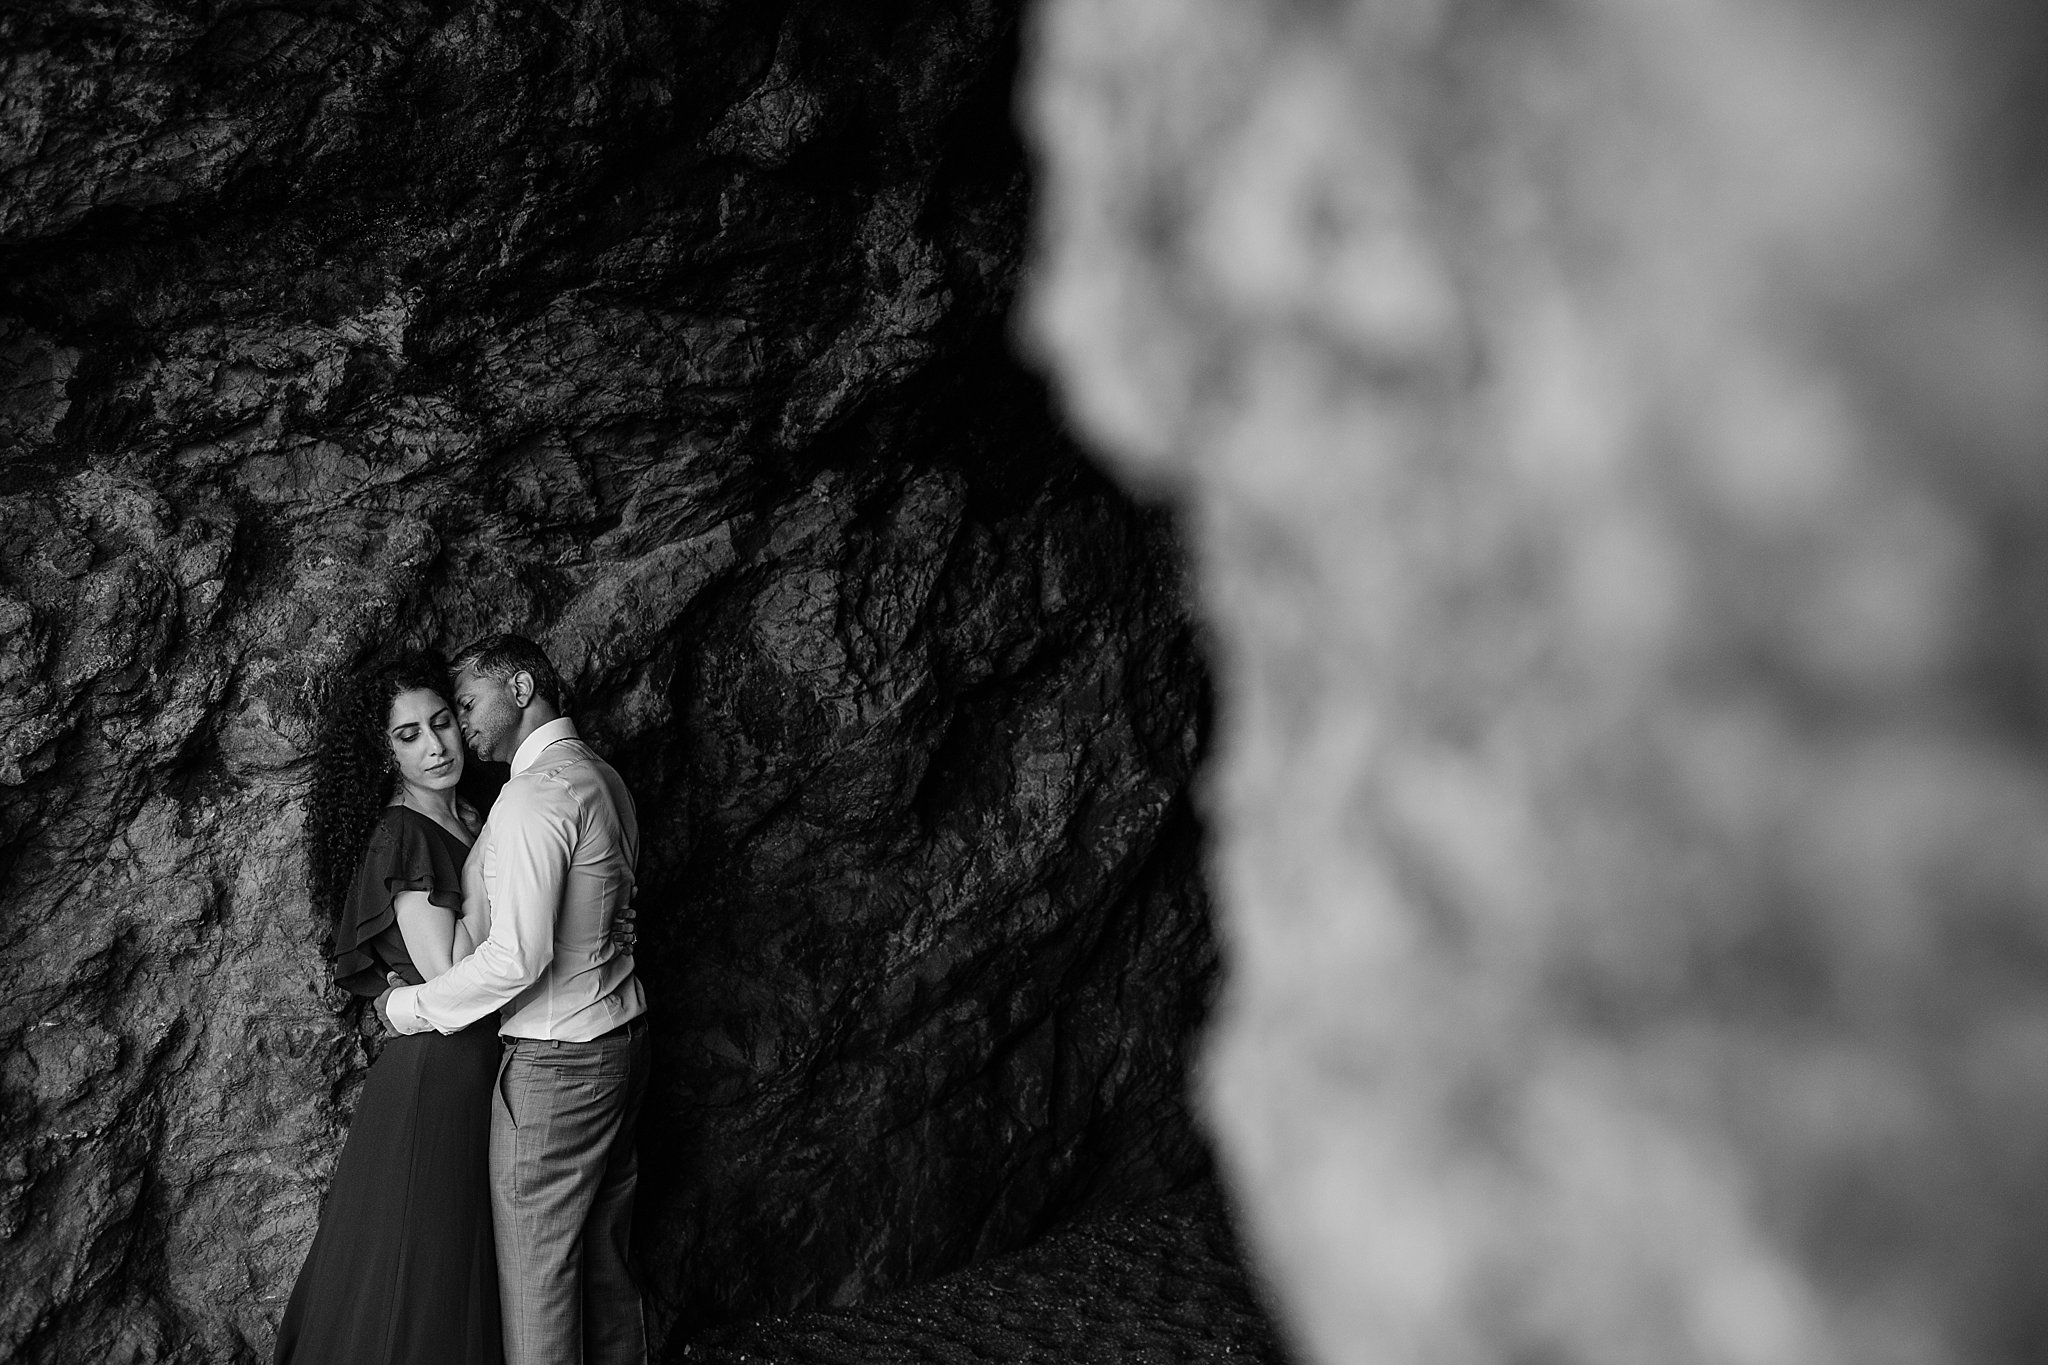 Black and white image of couple in a loving embrace against a rocky backdrop in San Francisco, CA